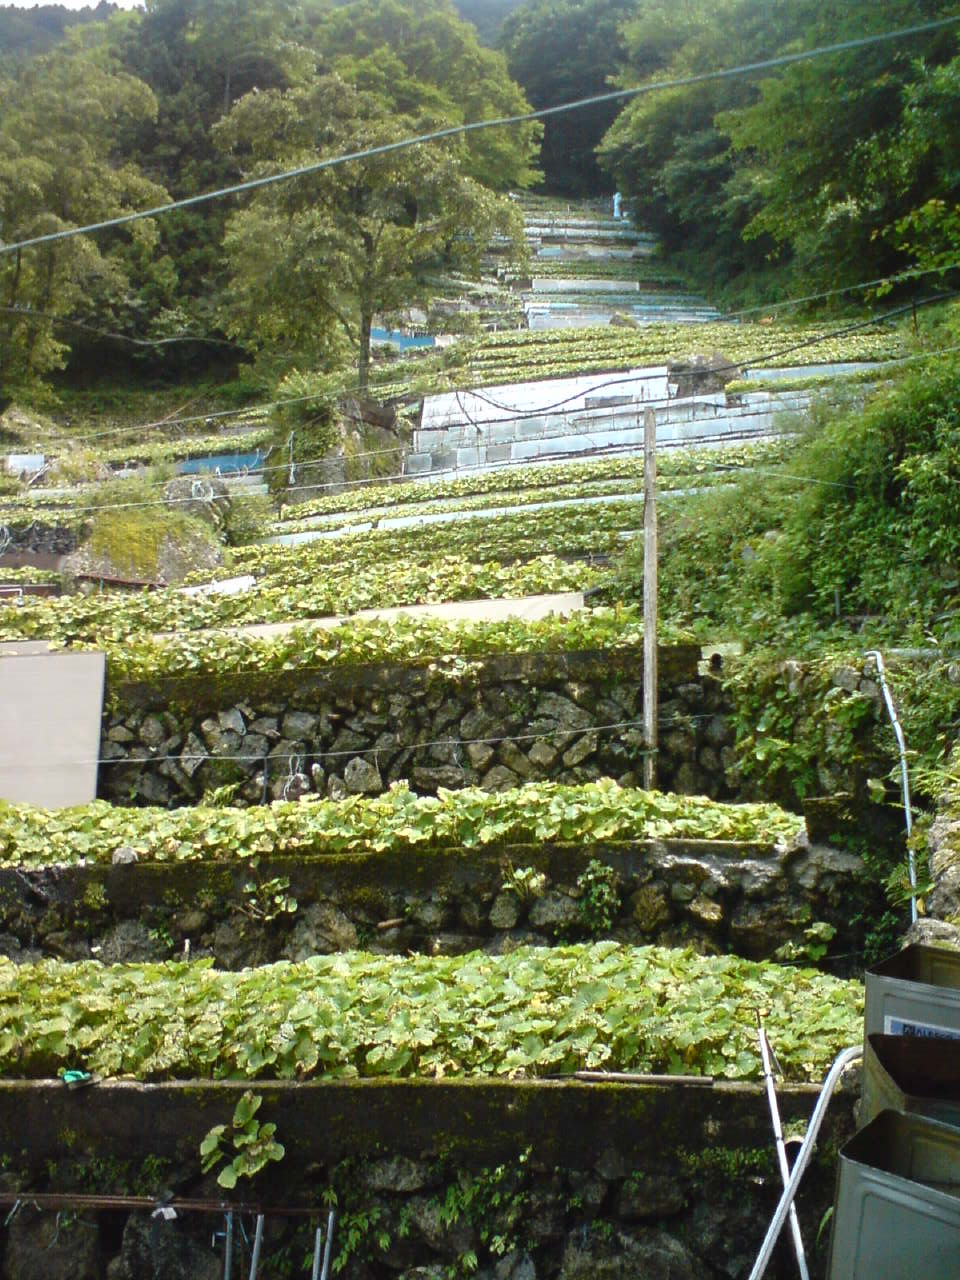 A visit to the birthplace of Wasabi, Utogi